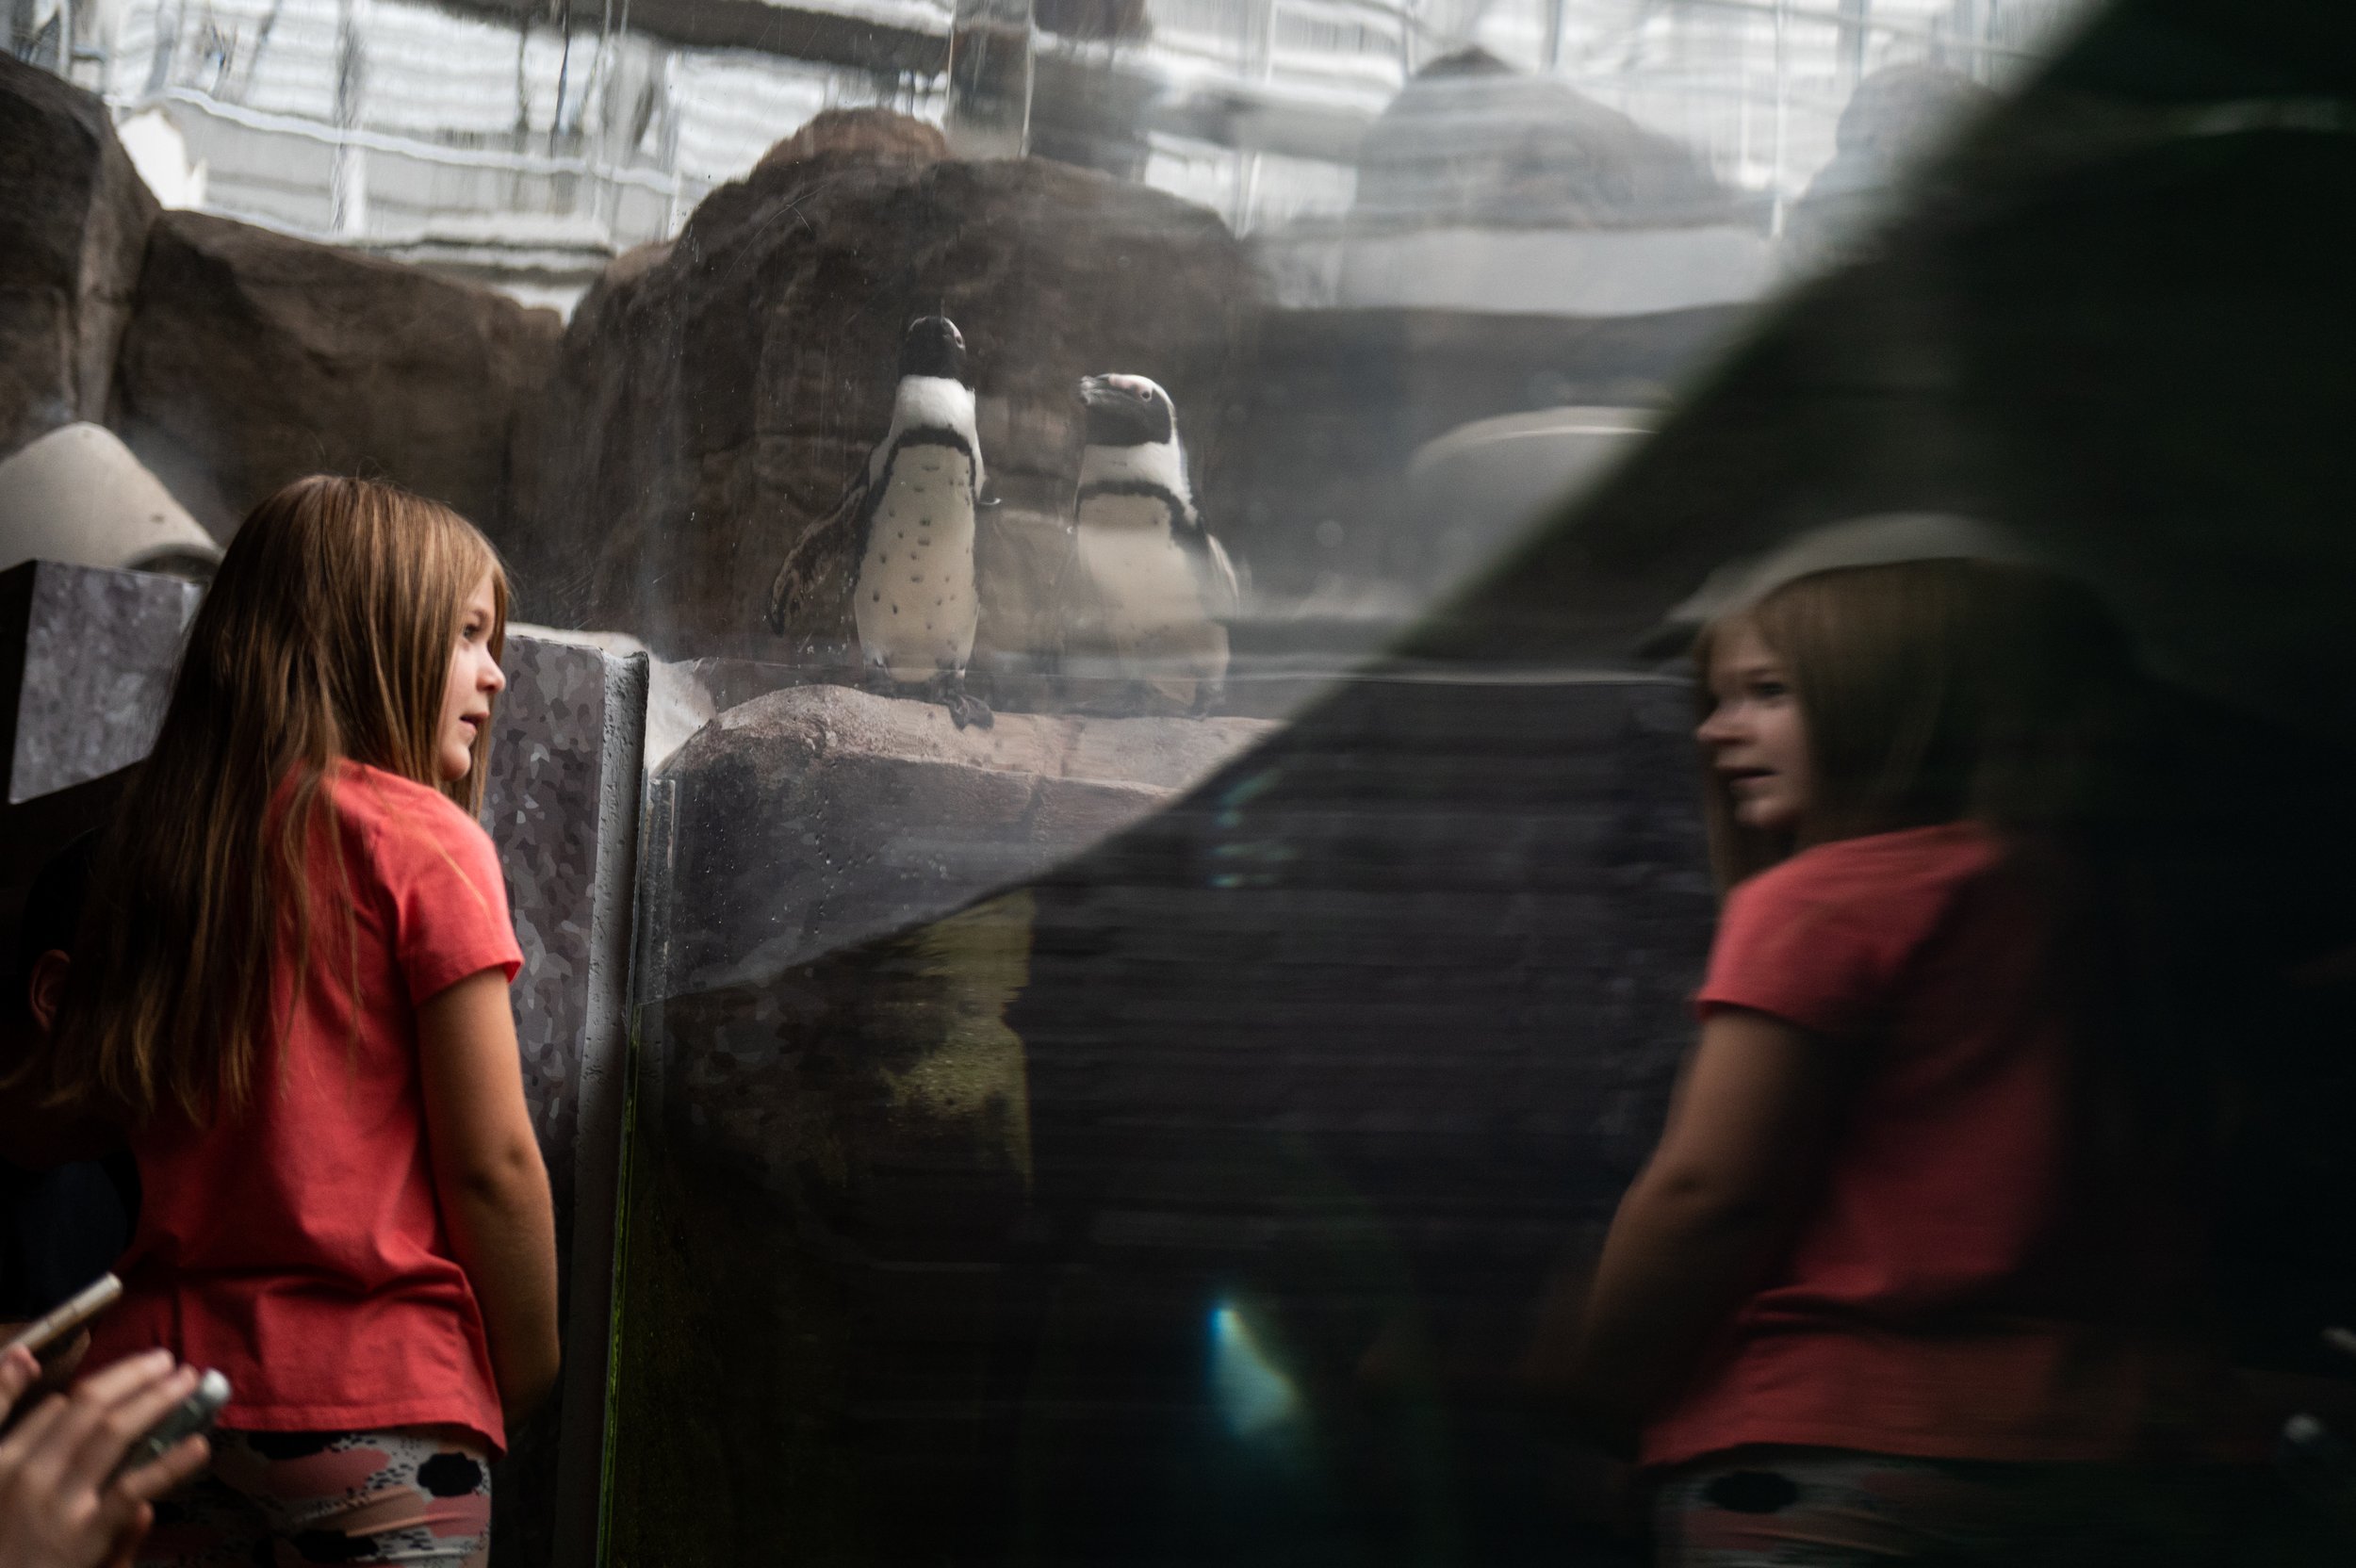   A young child looks into the penguin enclosure at the National Aviary in Pittsburgh, Pa. on Saturday, Sept. 2, 2022.   